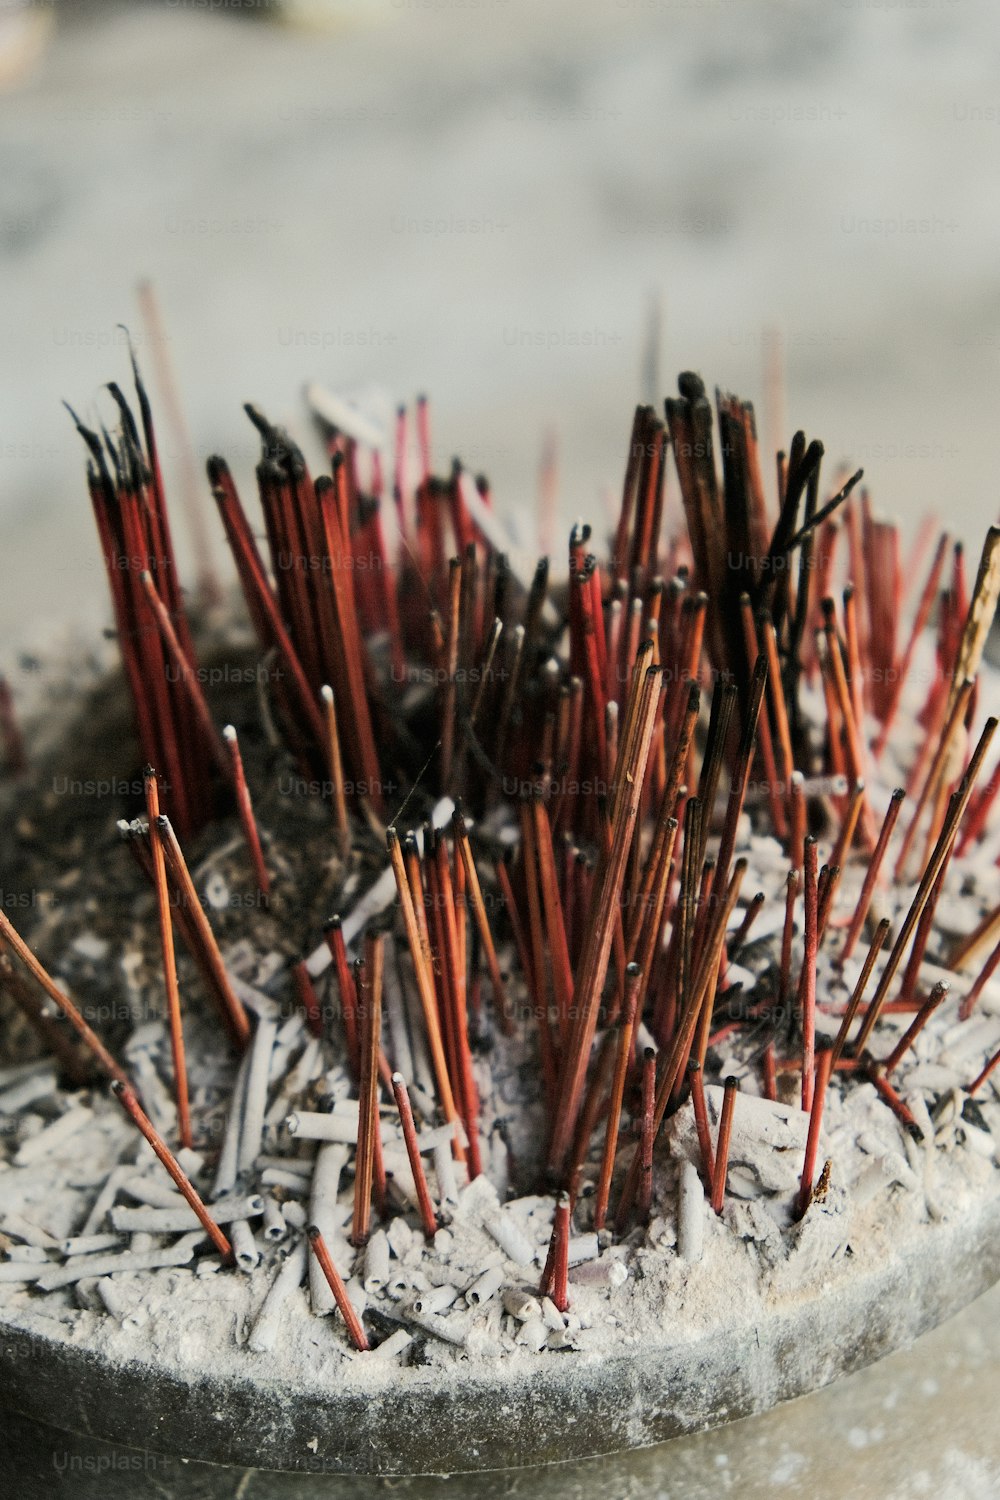 a close up of a potted plant with small sticks sticking out of it